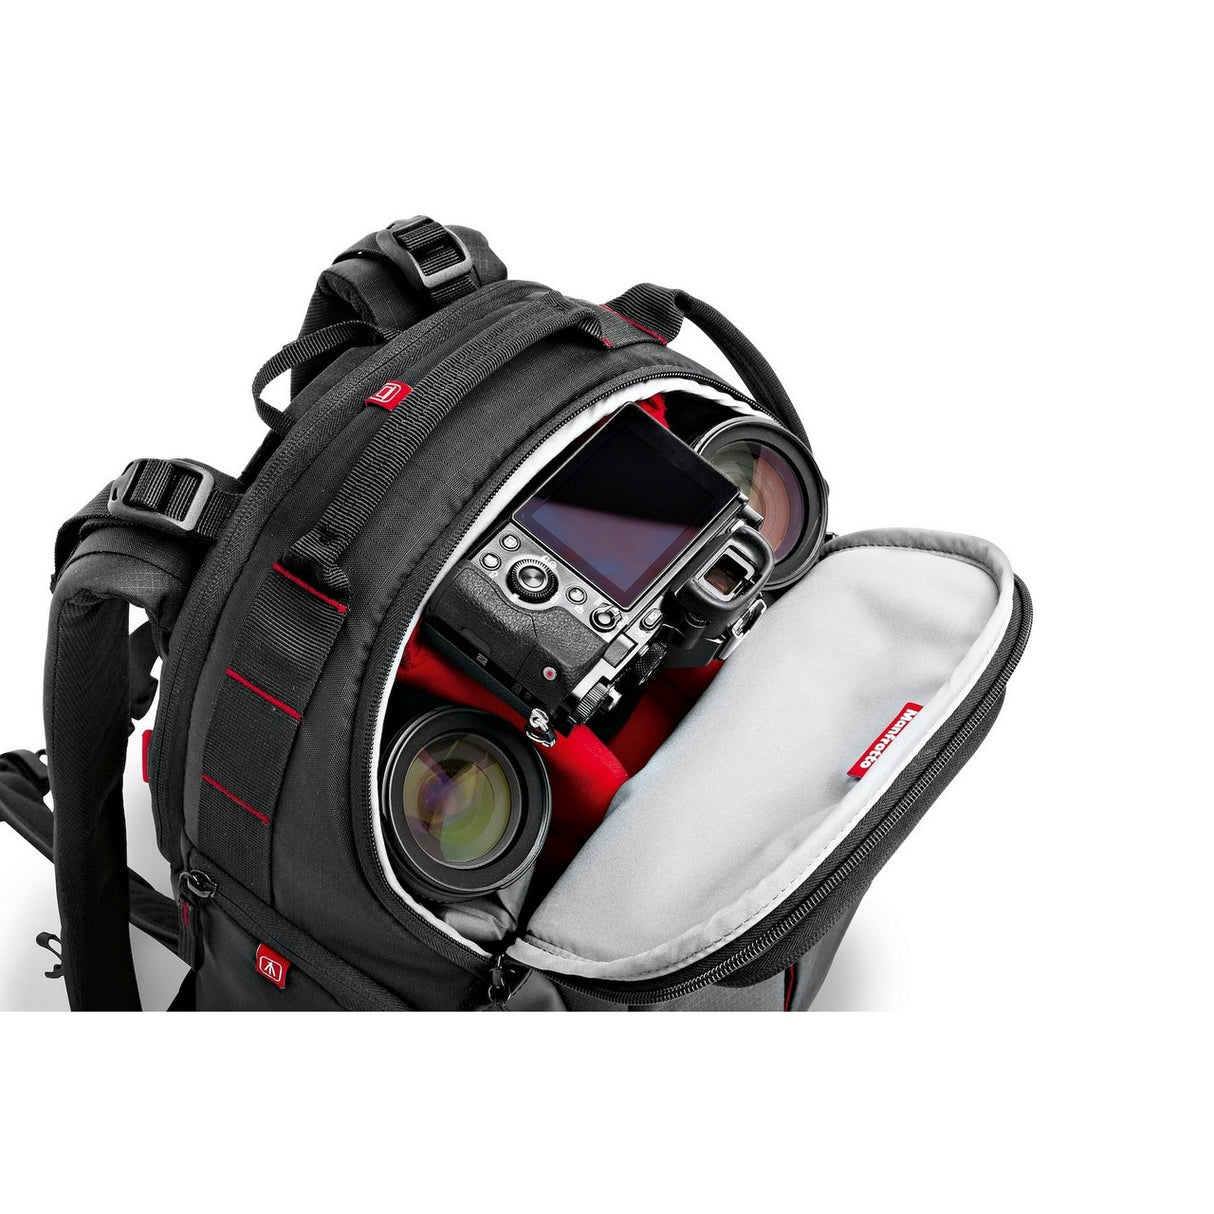 Manfrotto MB PL-B-130 | Pro Light Camera Backpack Bumblebee-130 for DSLR/CSC